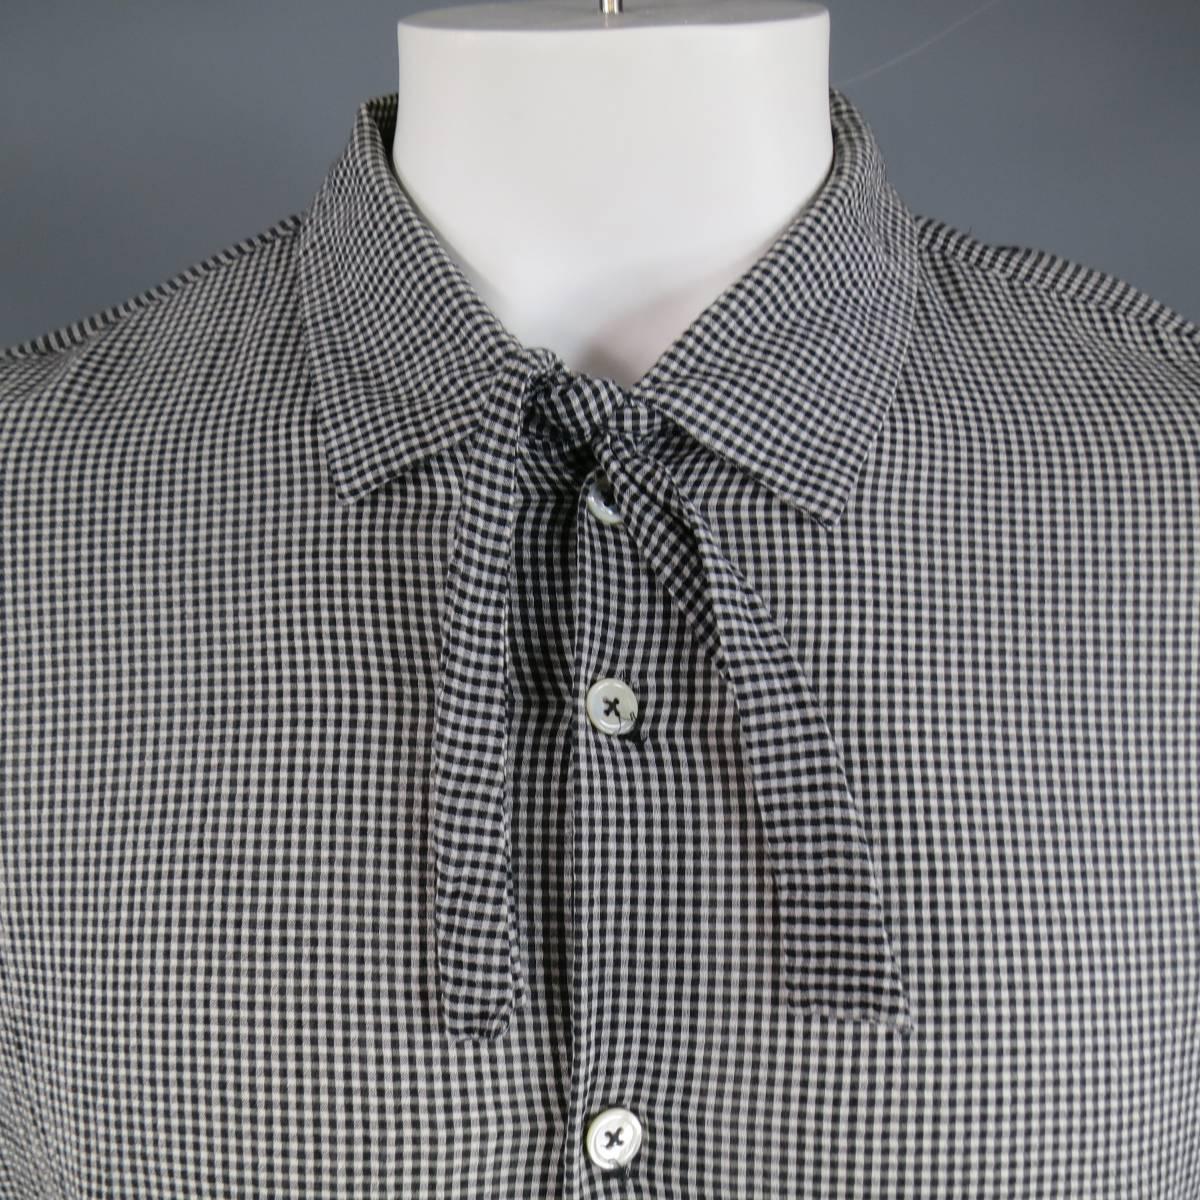 ANN DEMEULEMEESTER oversized long sleeve shirt in a textured cotton silk blend black & white micro gingham fabric with a tie closure pointed collar, button up front, and high low hemline. Stains throughout. As-Is.
 
Good Pre-Owned